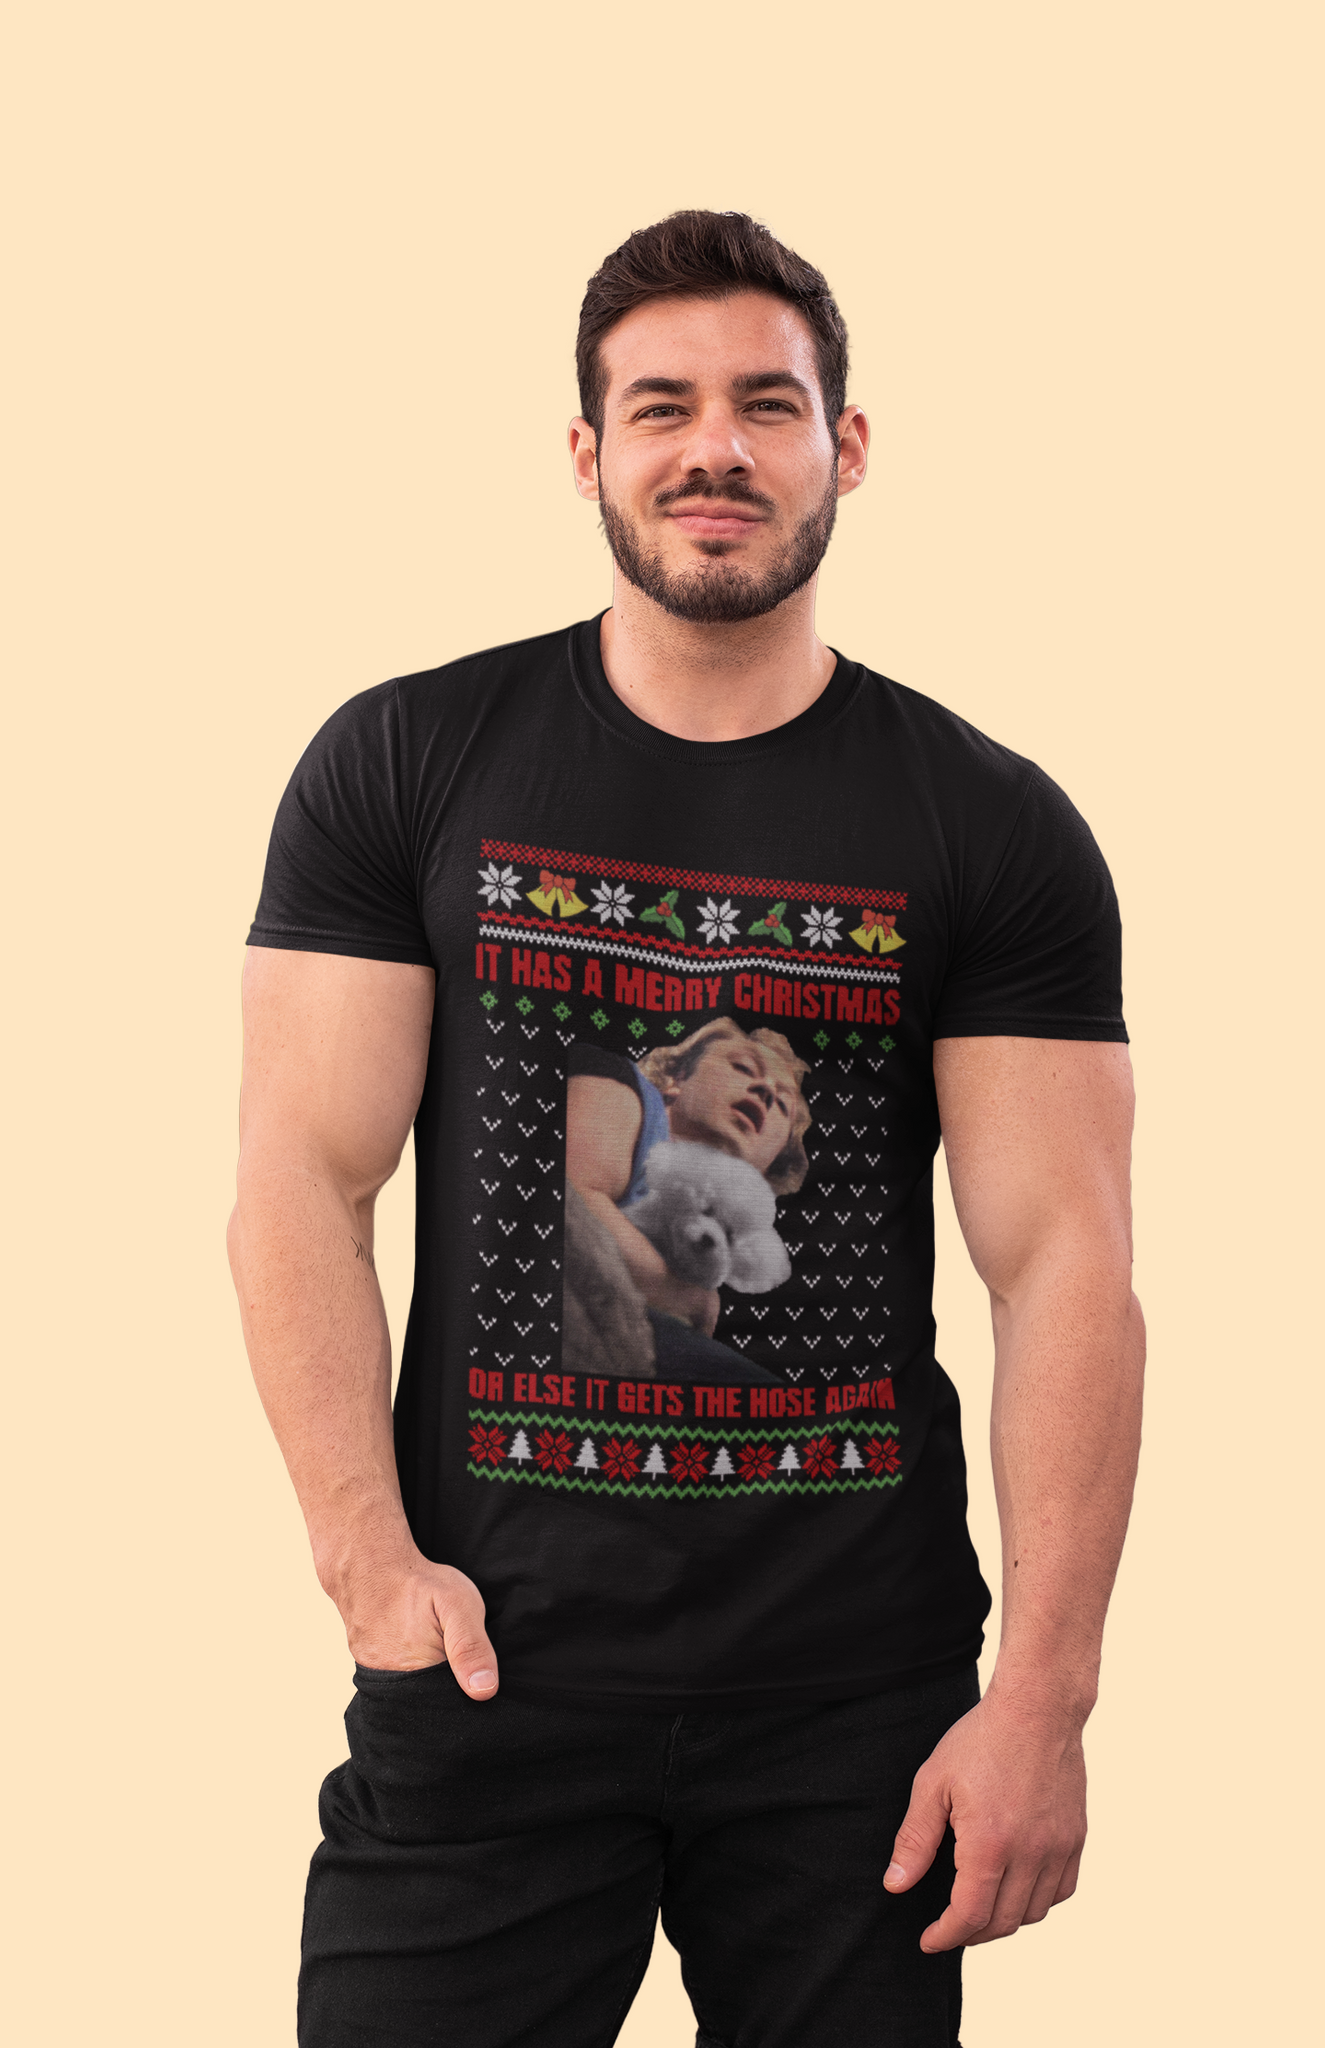 Silence Of The Lamb Ugly Sweater T Shirt, Jame Gumb Tshirt, It Has A Merry Christmas Shirt, Christmas Gifts, Halloween Gifts